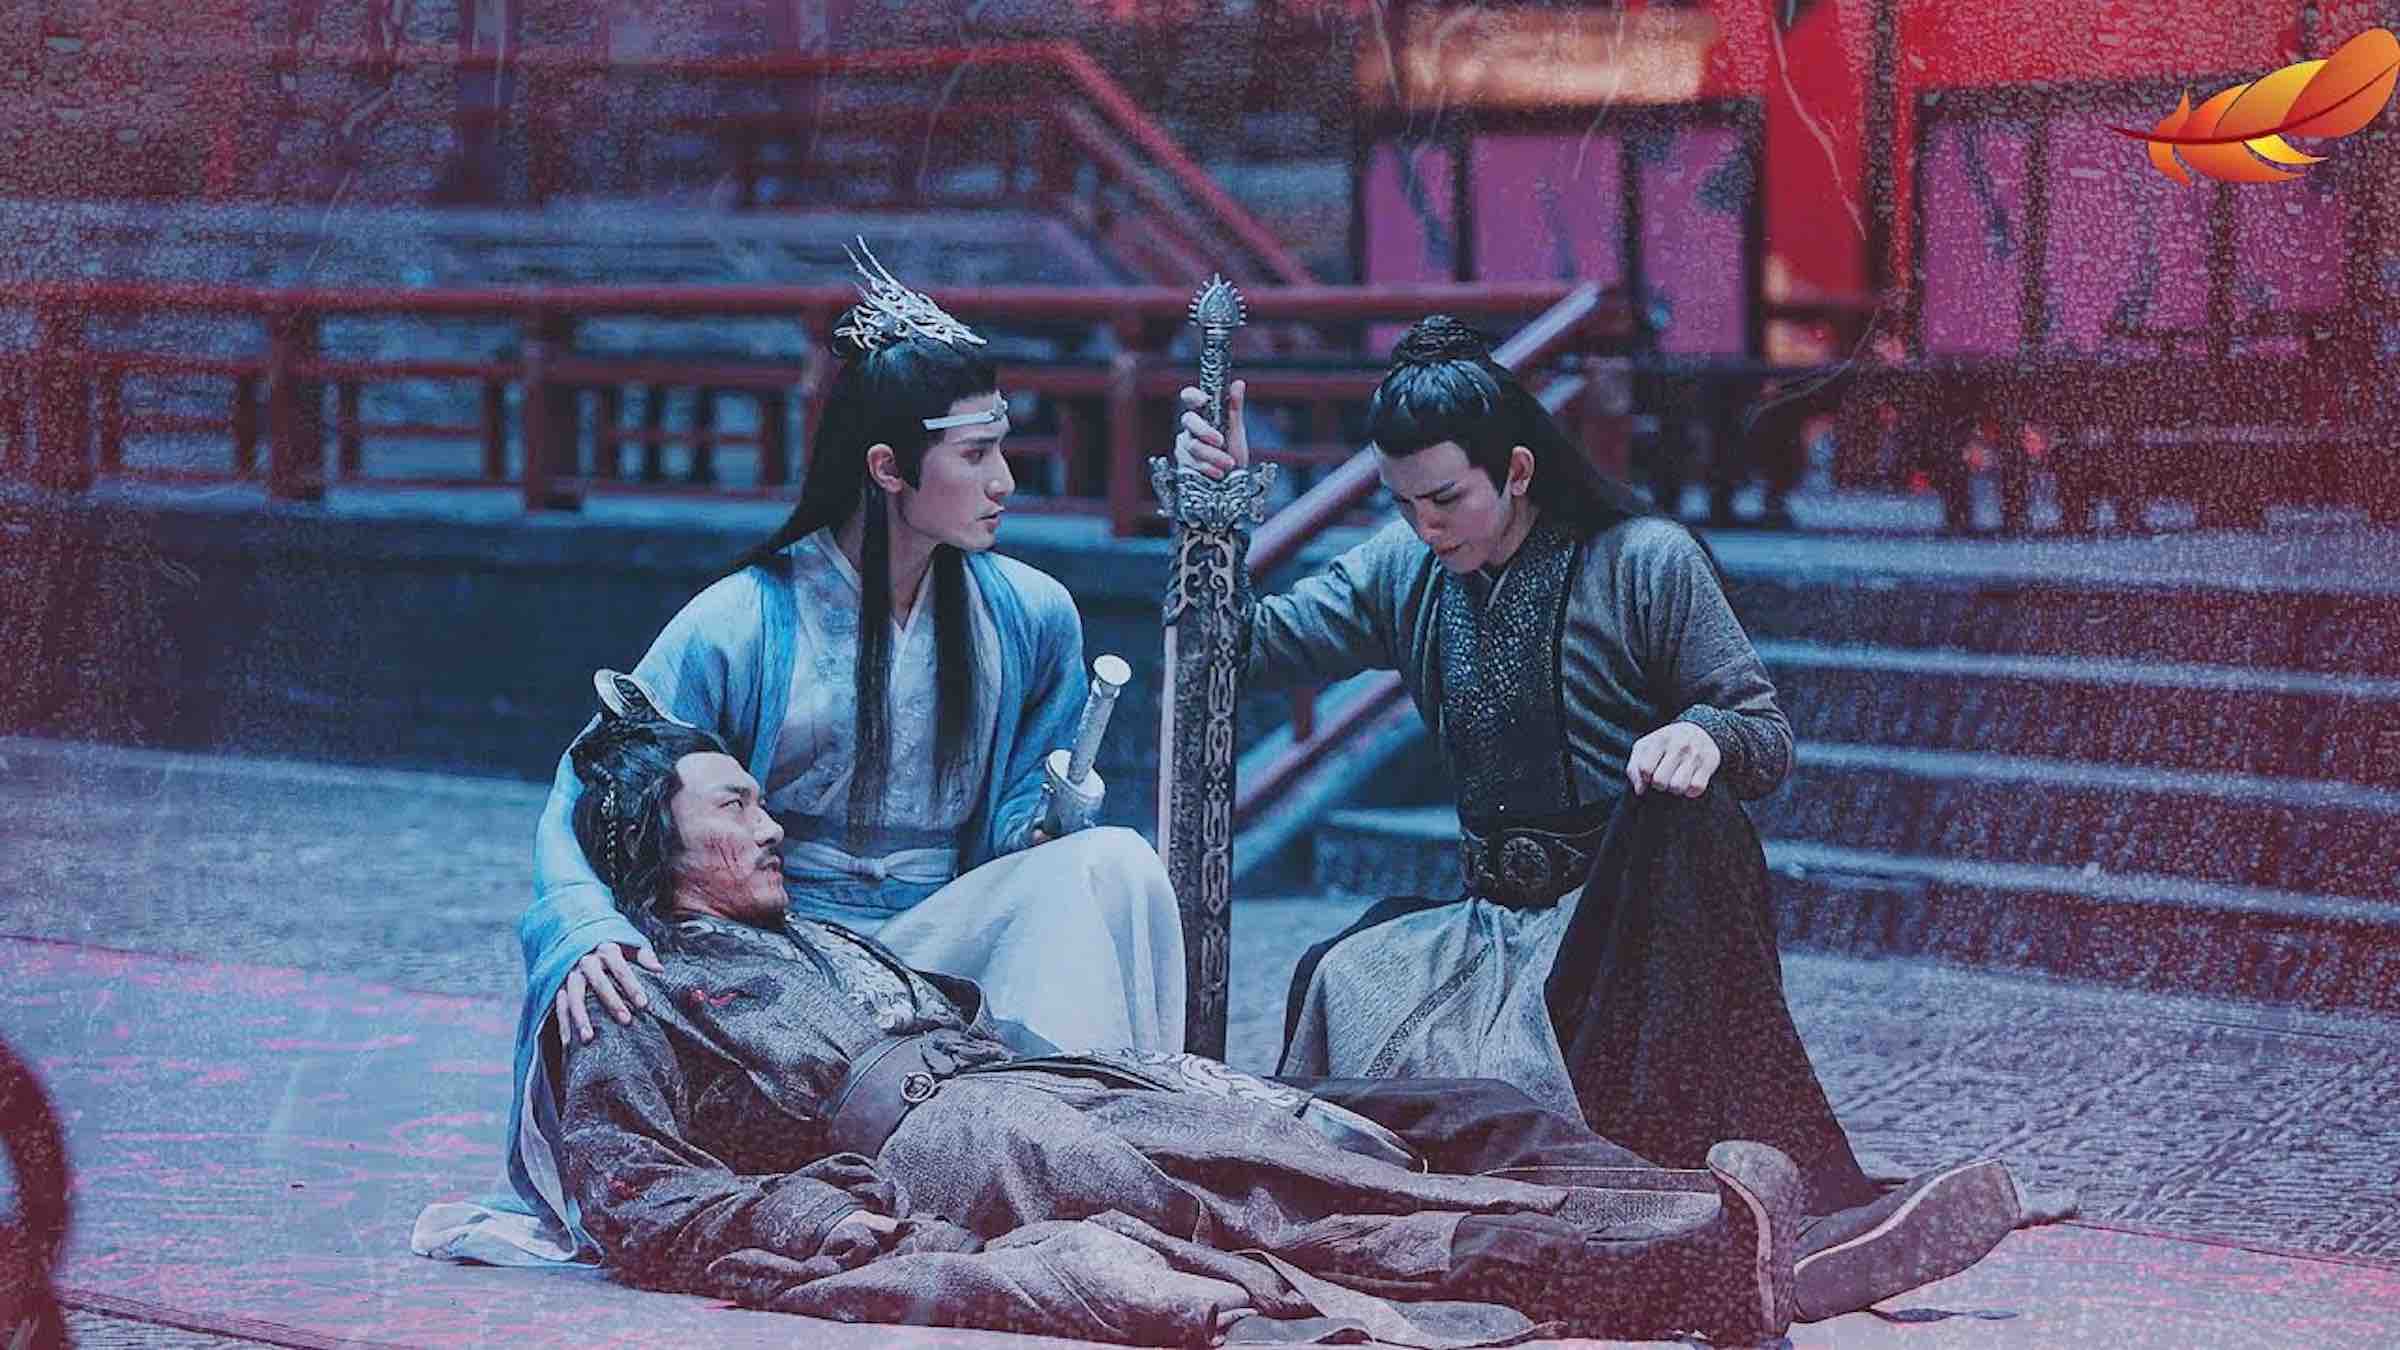 Come with us as we unpack the complex relationship that develops between Lan Xichen and Jin Guang Yao in 'The Untamed'.